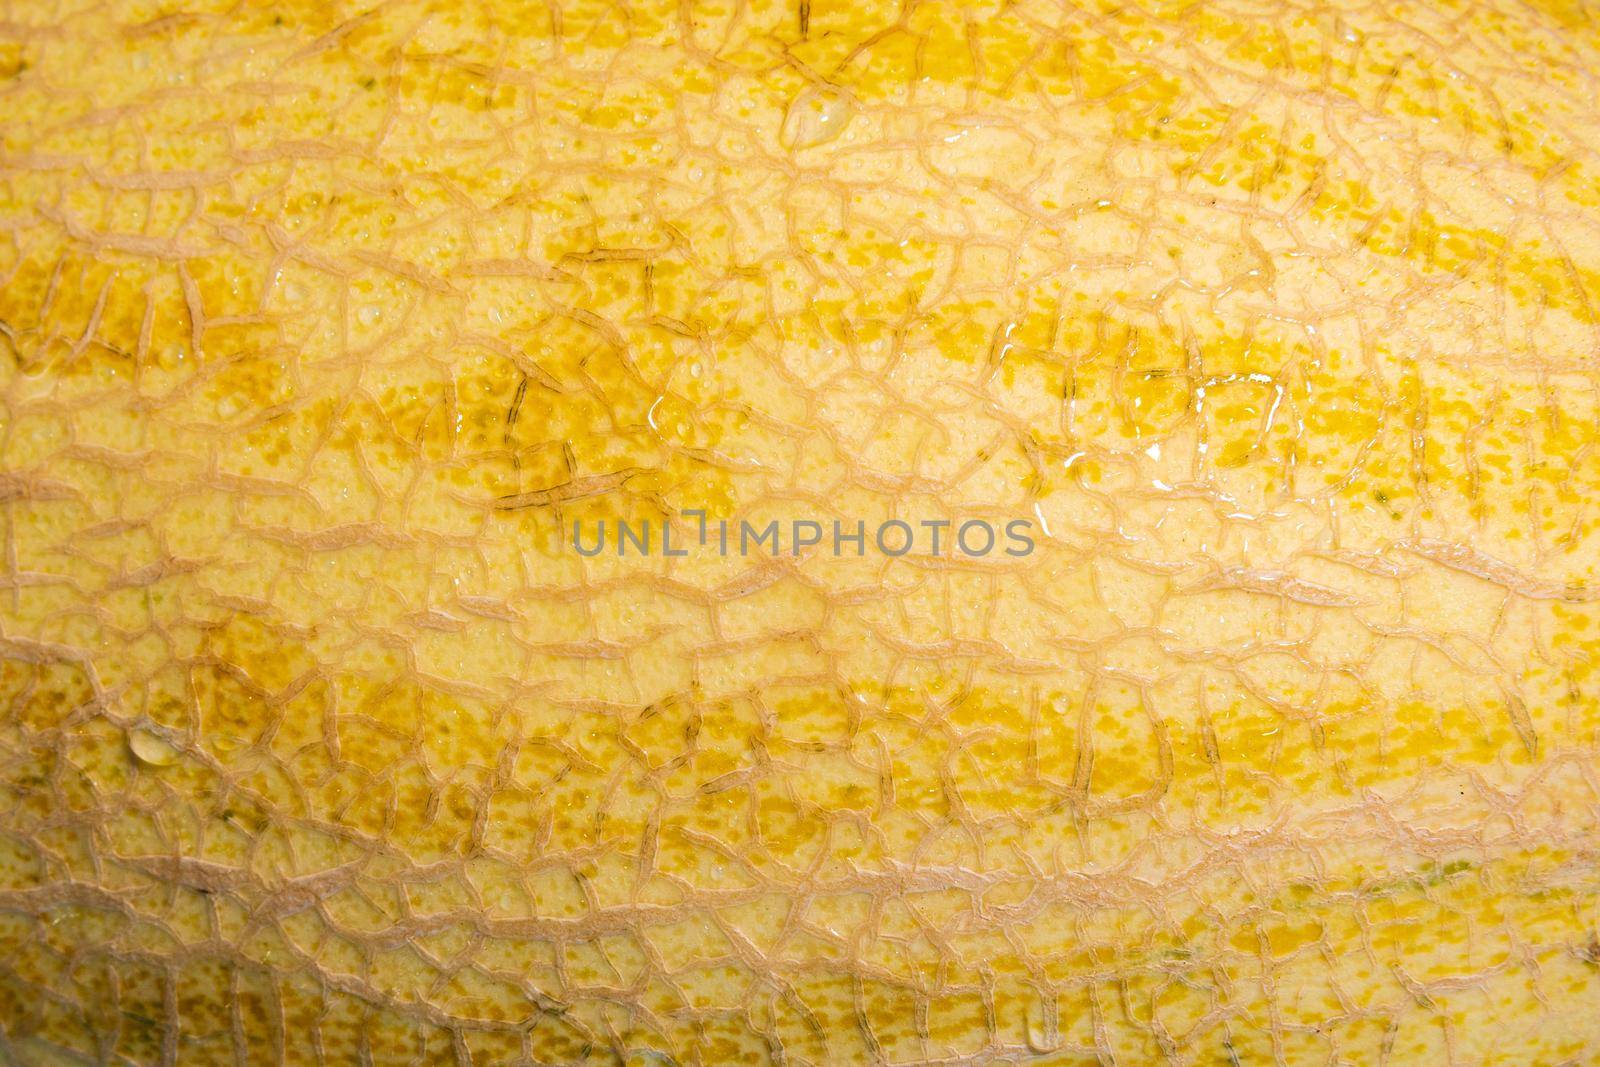 Melon close-up background of fruit skin dripping water. Juicy fruit by darksoul72